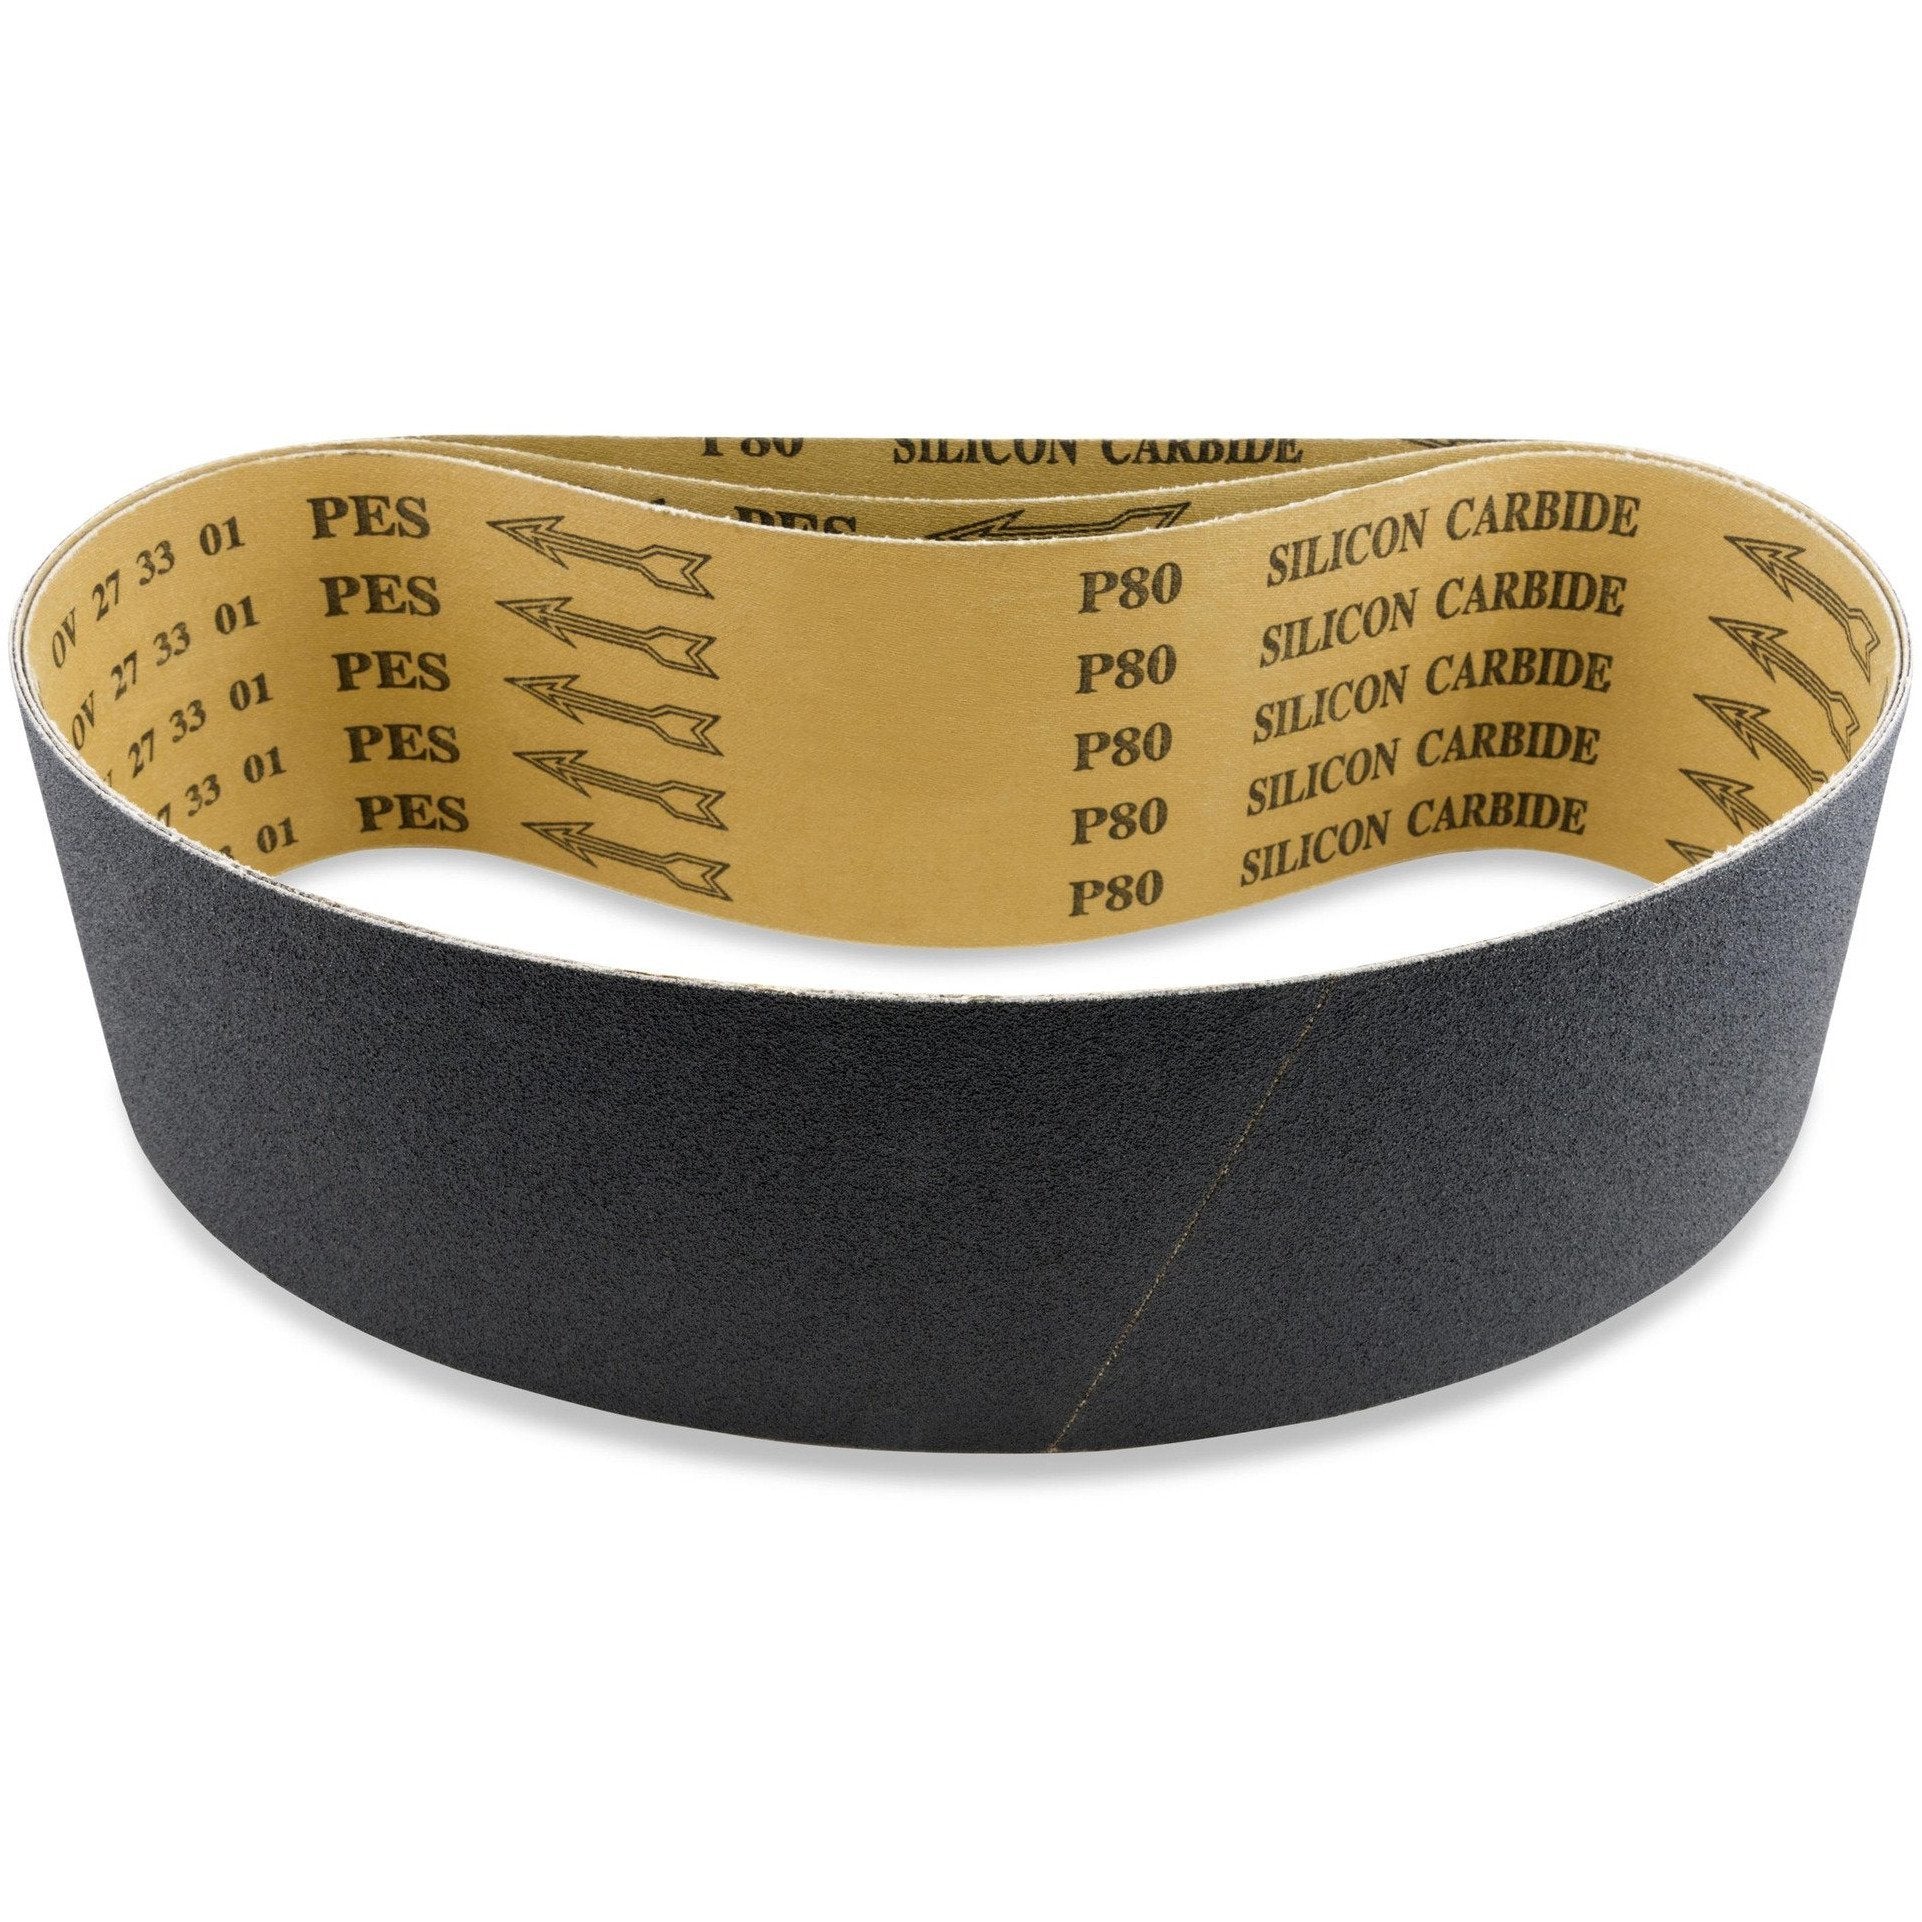 2 X 30 Inch Industrial Grade Silicon Carbide Sanding Belts, 6 Pack - Red Label Abrasives